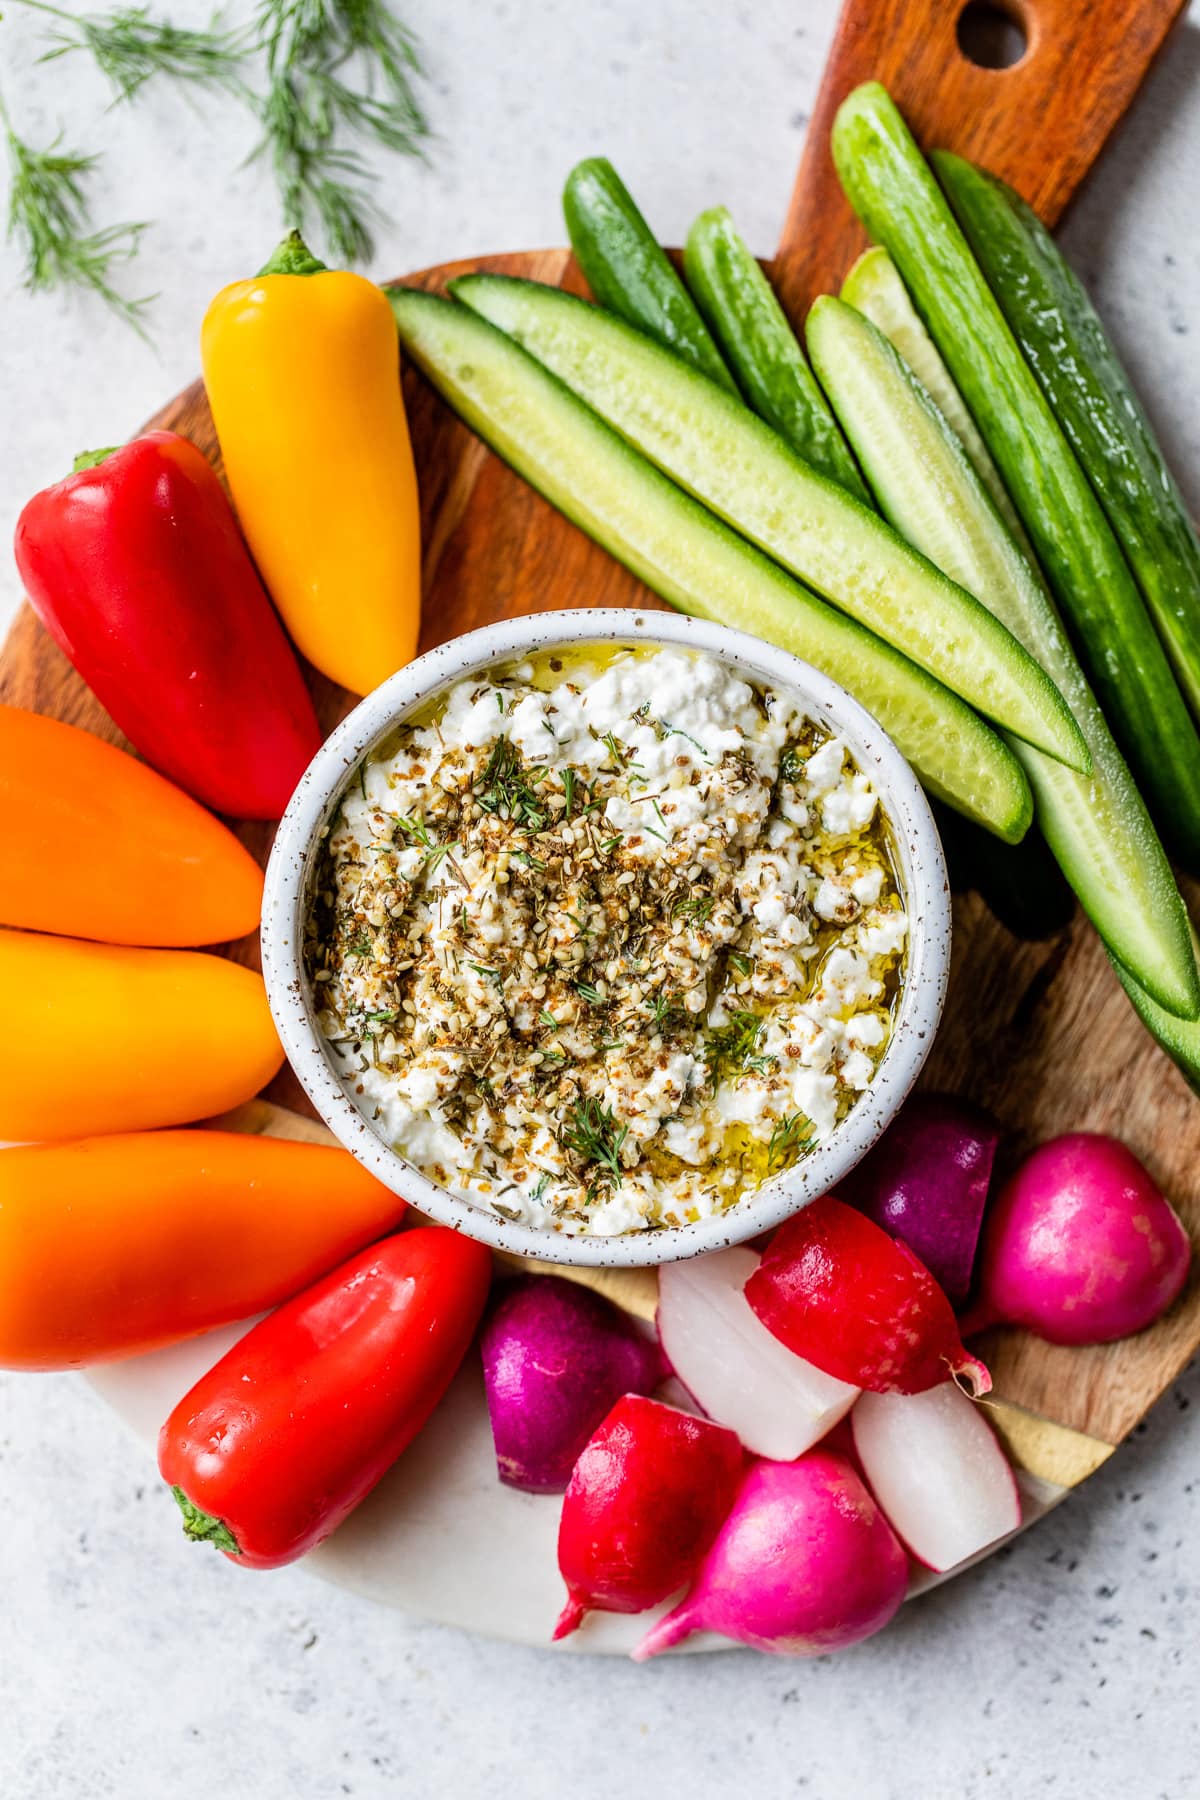 platter with cut up veggies and cottage cheese